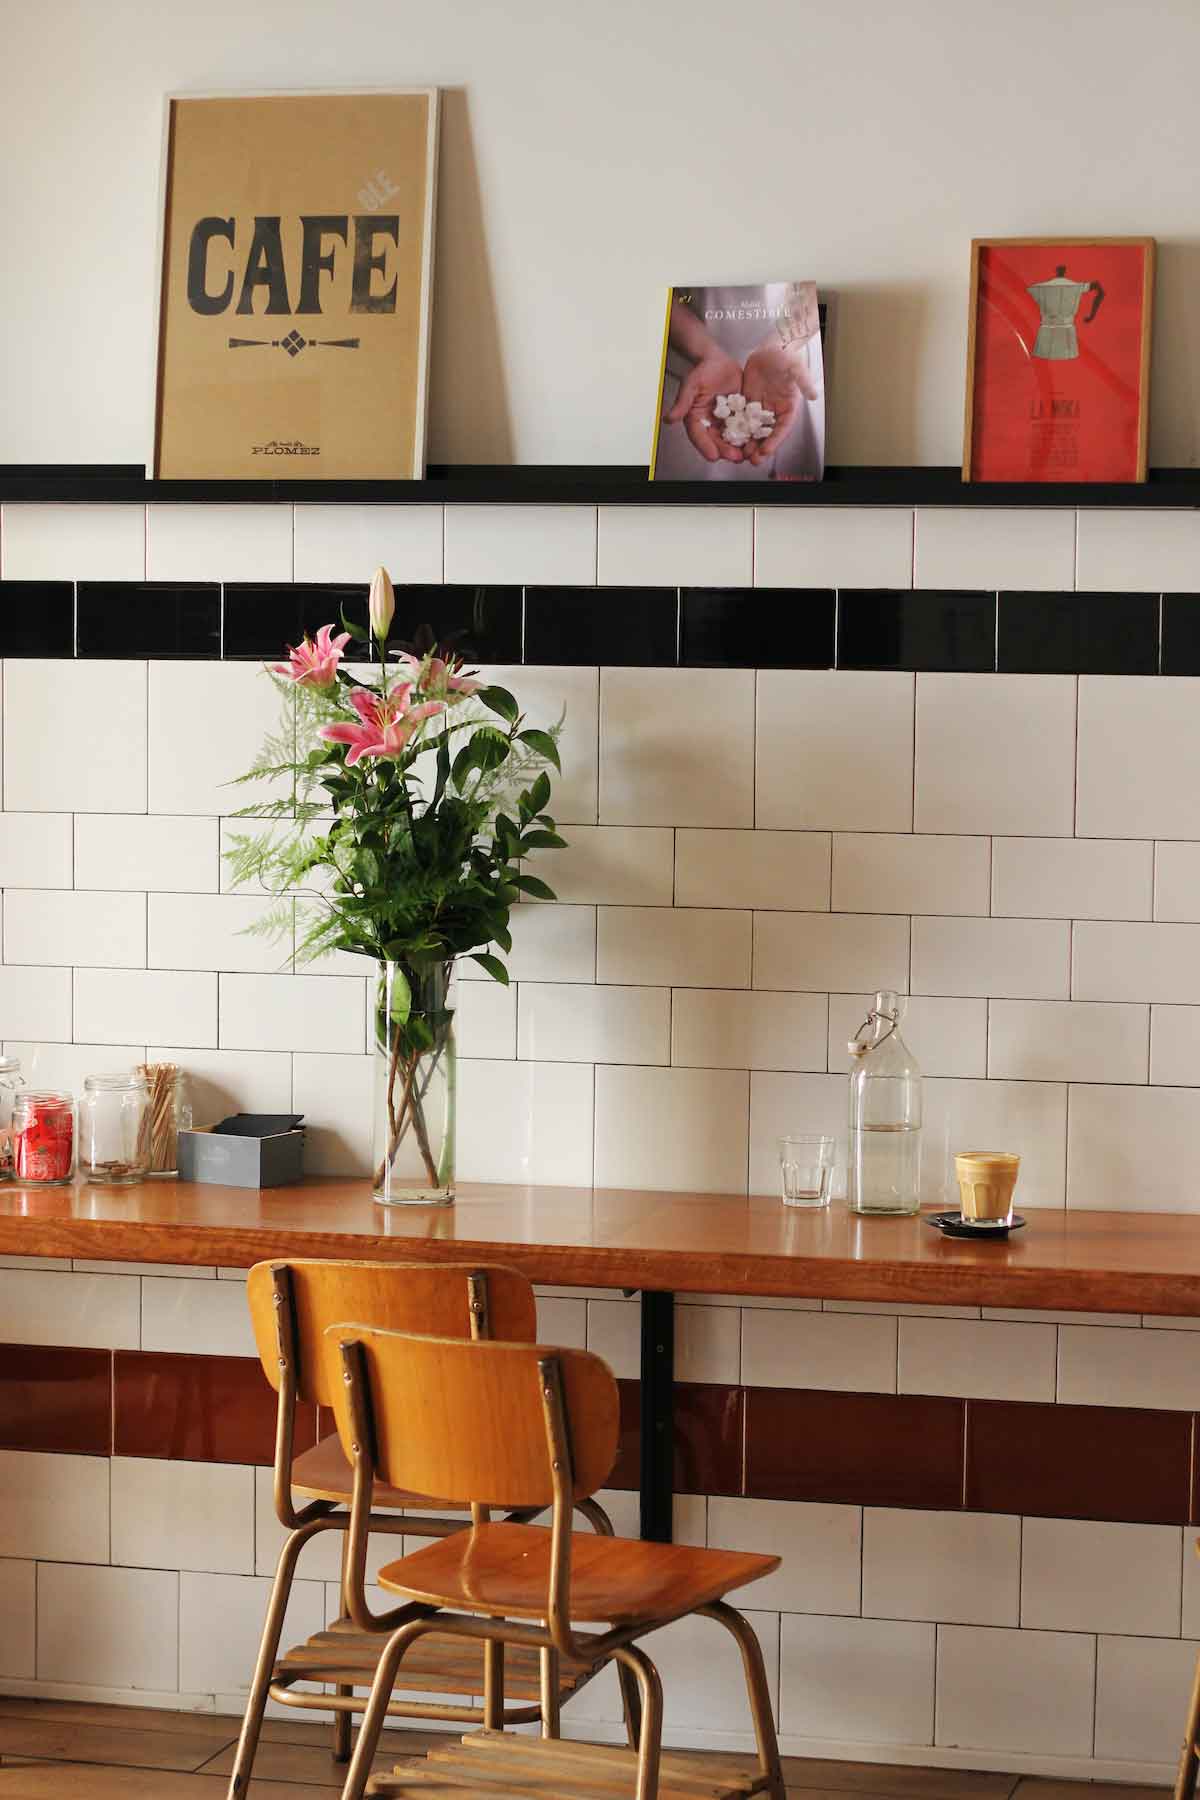 Wooden counter against a wall with two wooden chairs in front and a cup of coffee on top, with coffee-themed decor on the above wall.